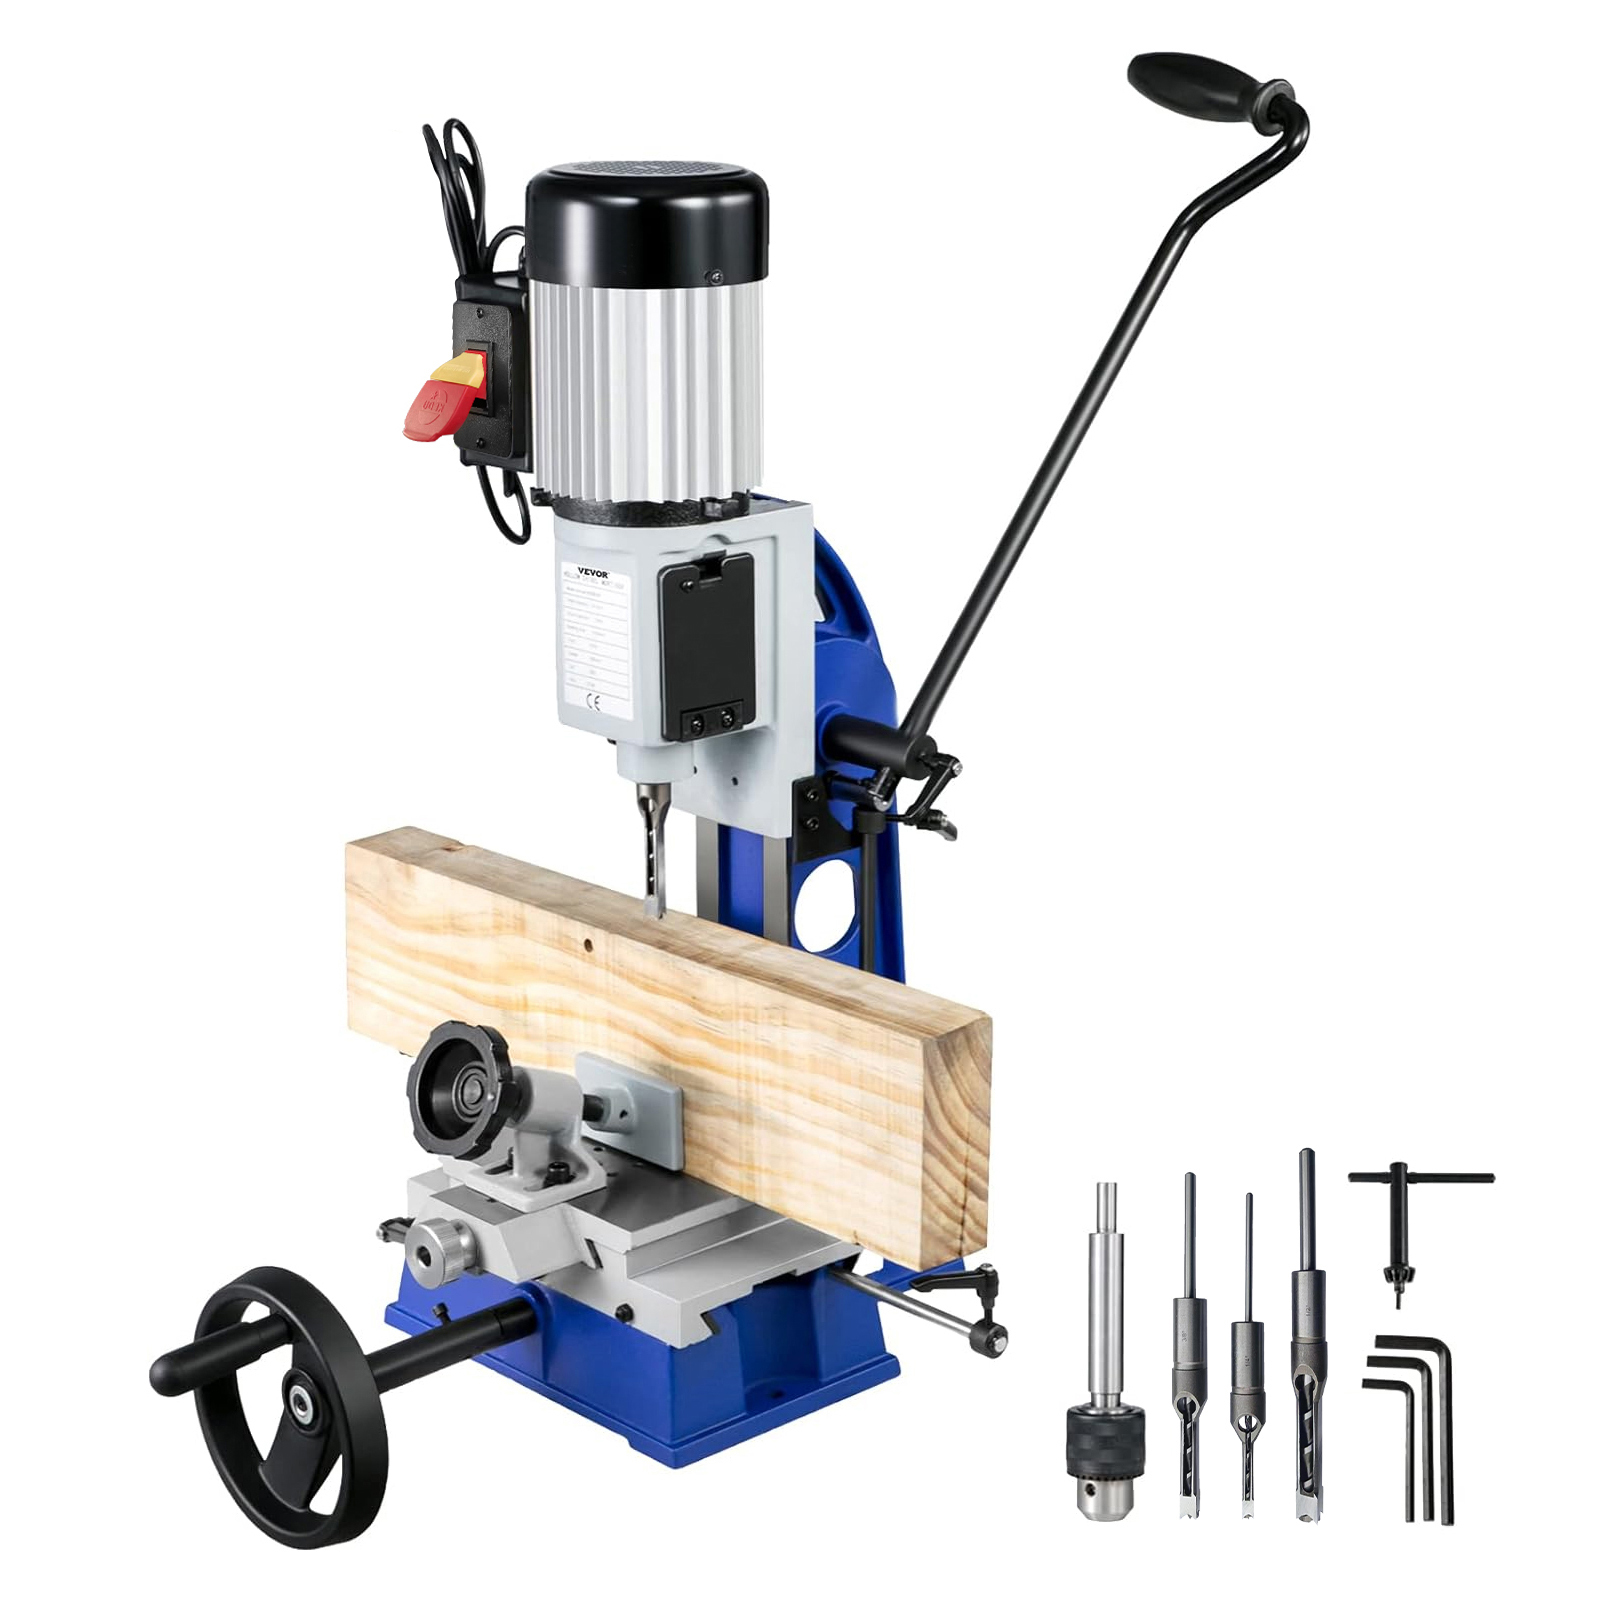 Mortise Machine Powermatic Mortise With Movable Workbench For Woodworking Chisel от Vevor Many GEOs